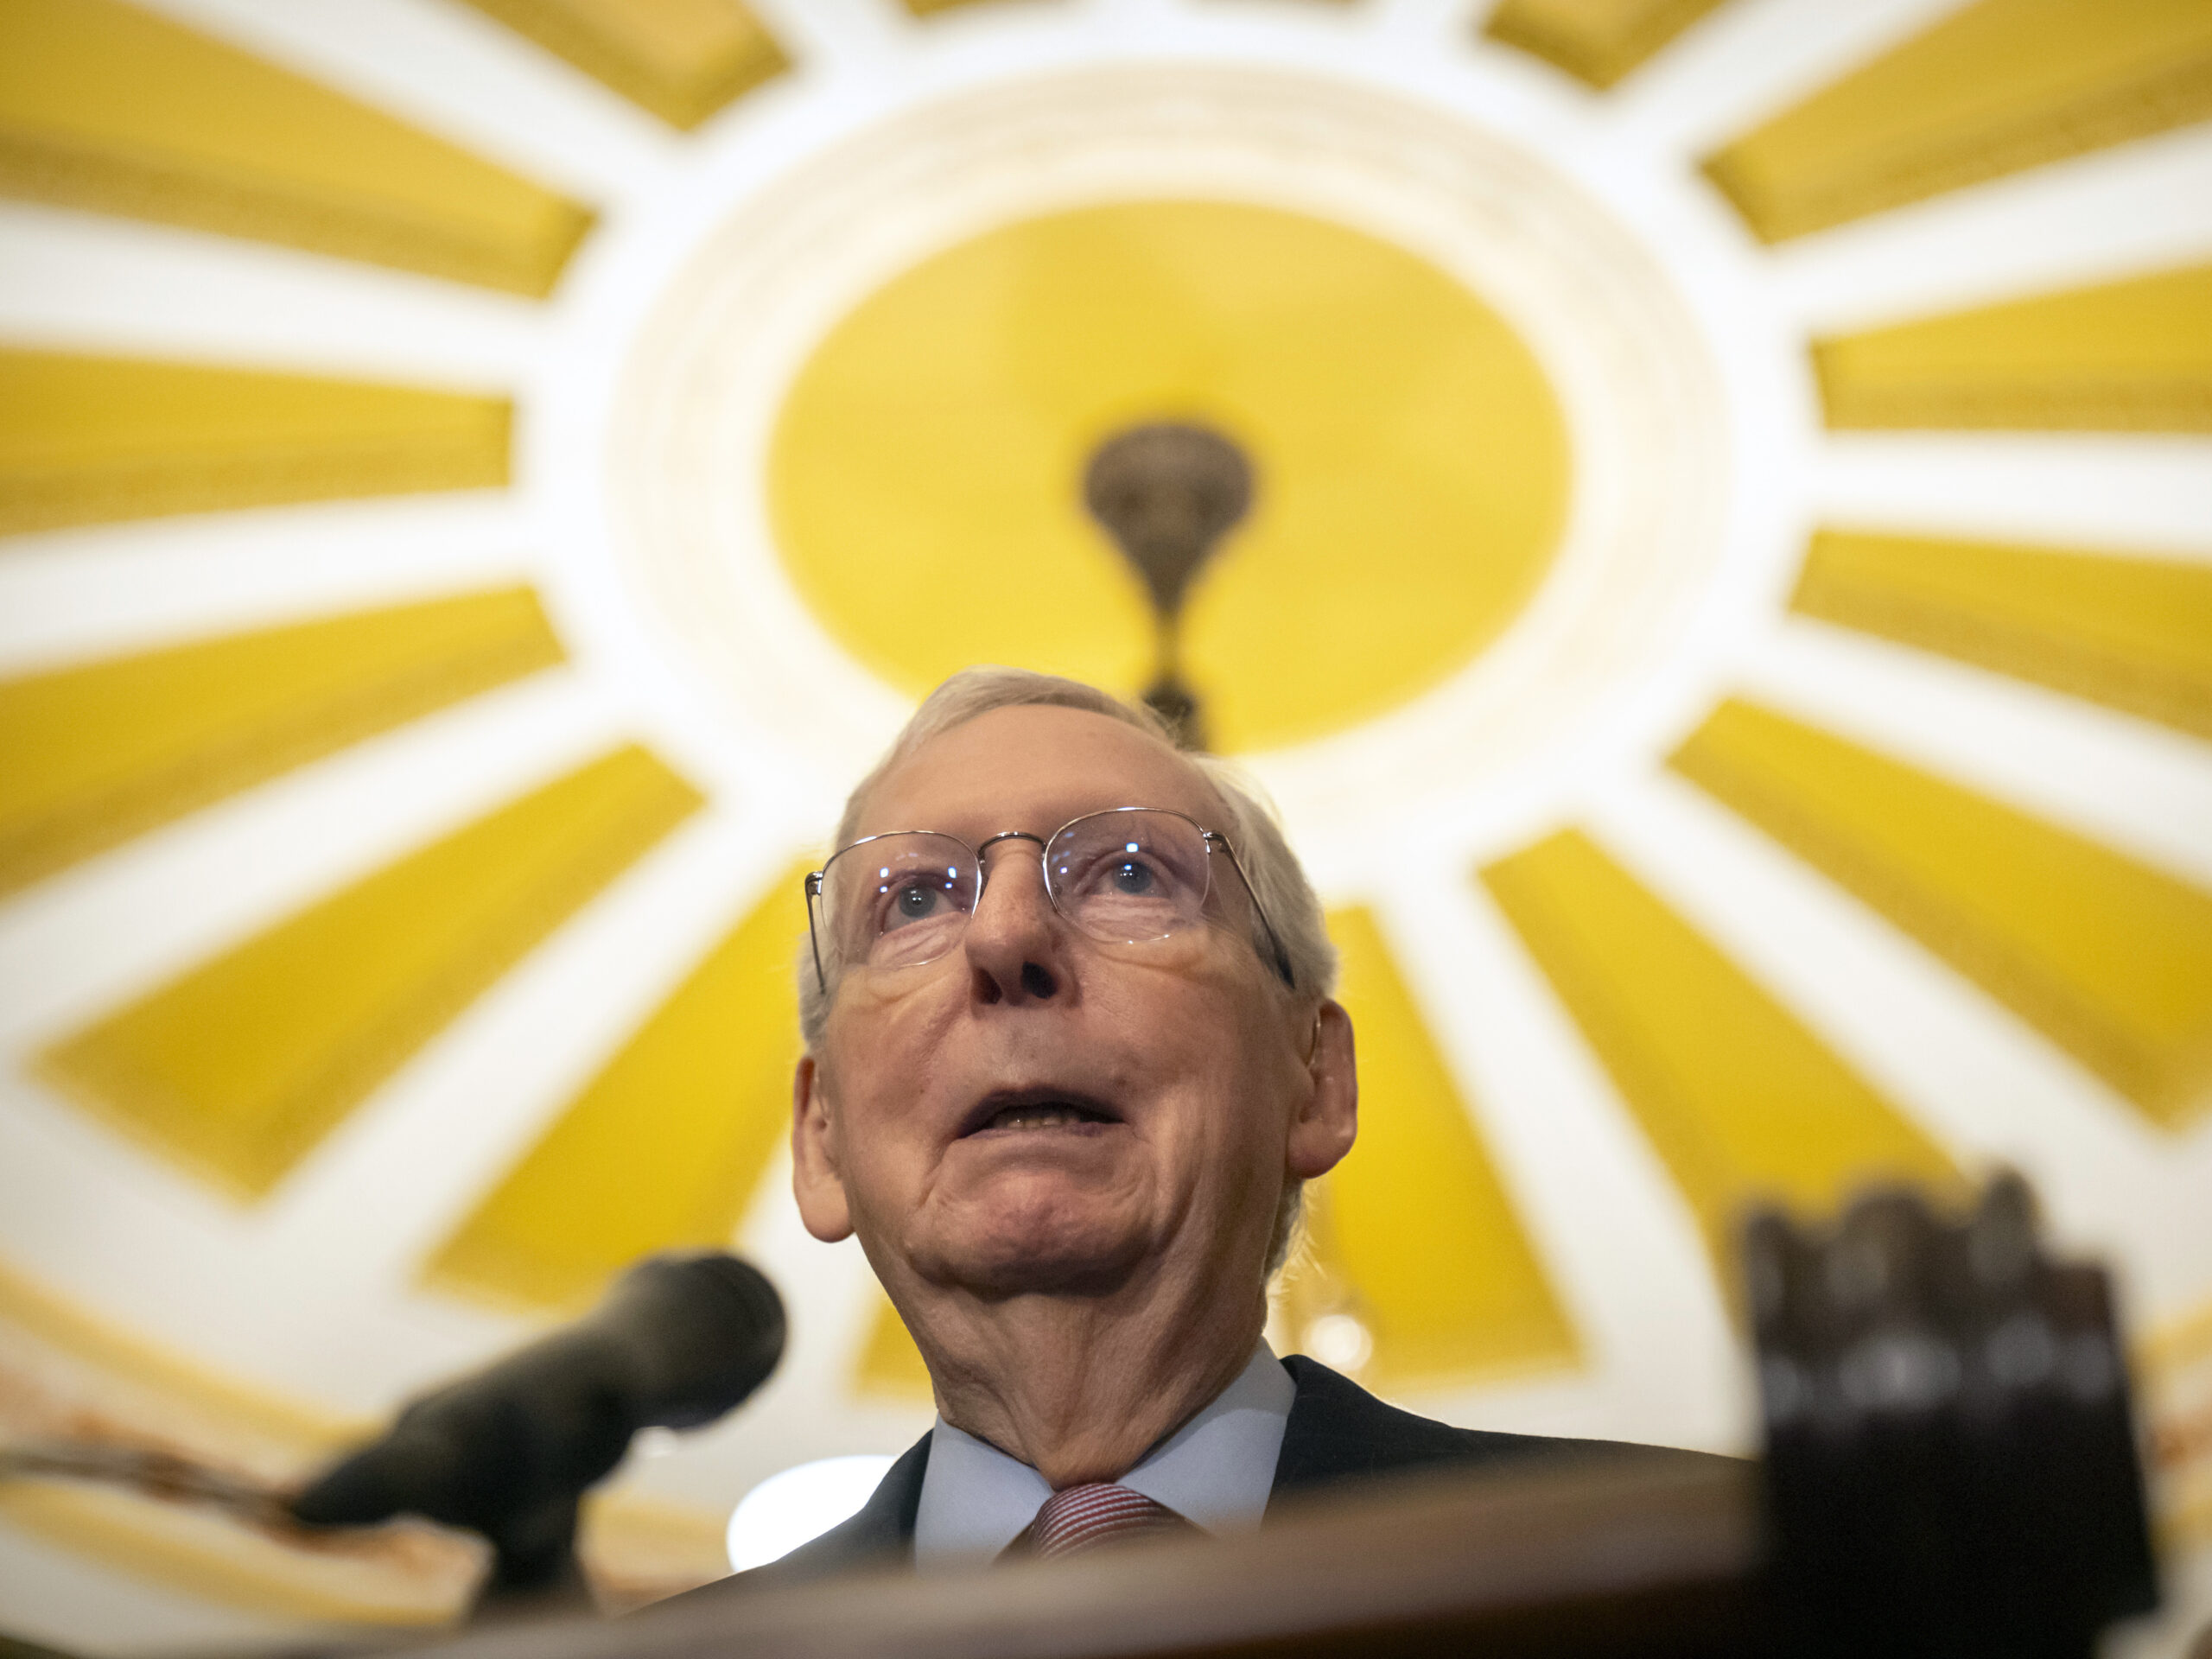 Mitch McConnell will step down as Senate minority leader in November